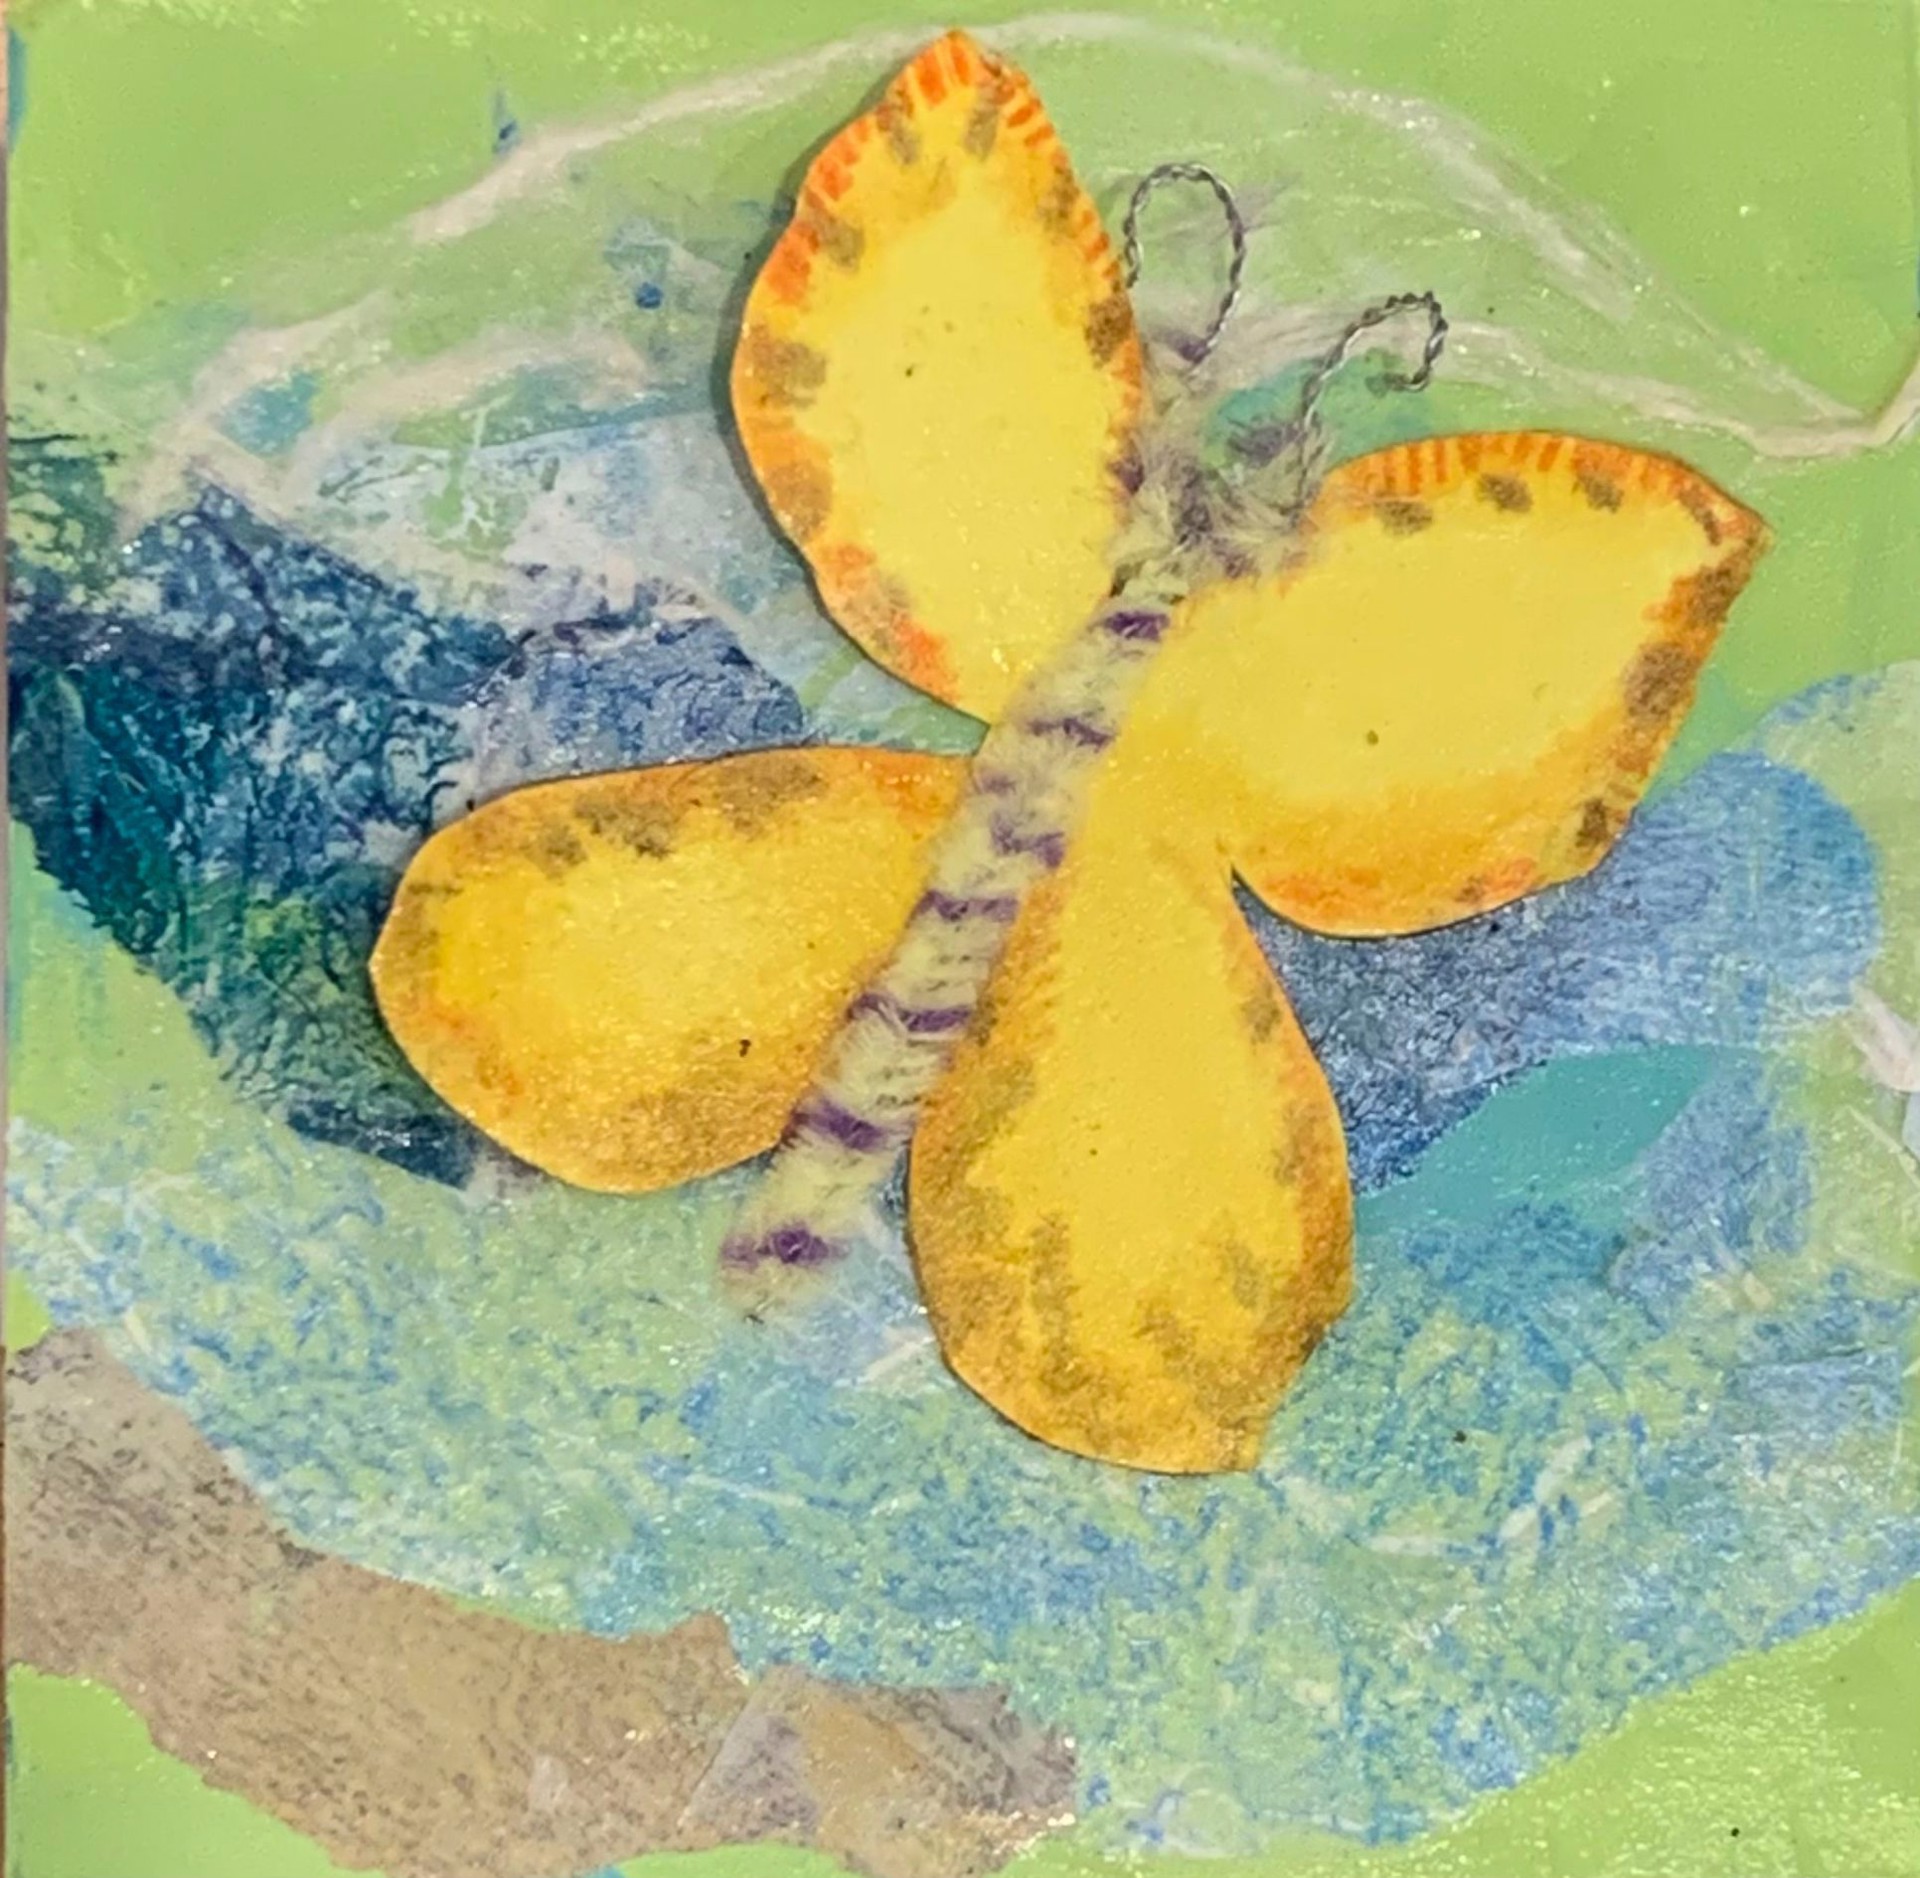 Butterfly At The Beach by Kristen Dill